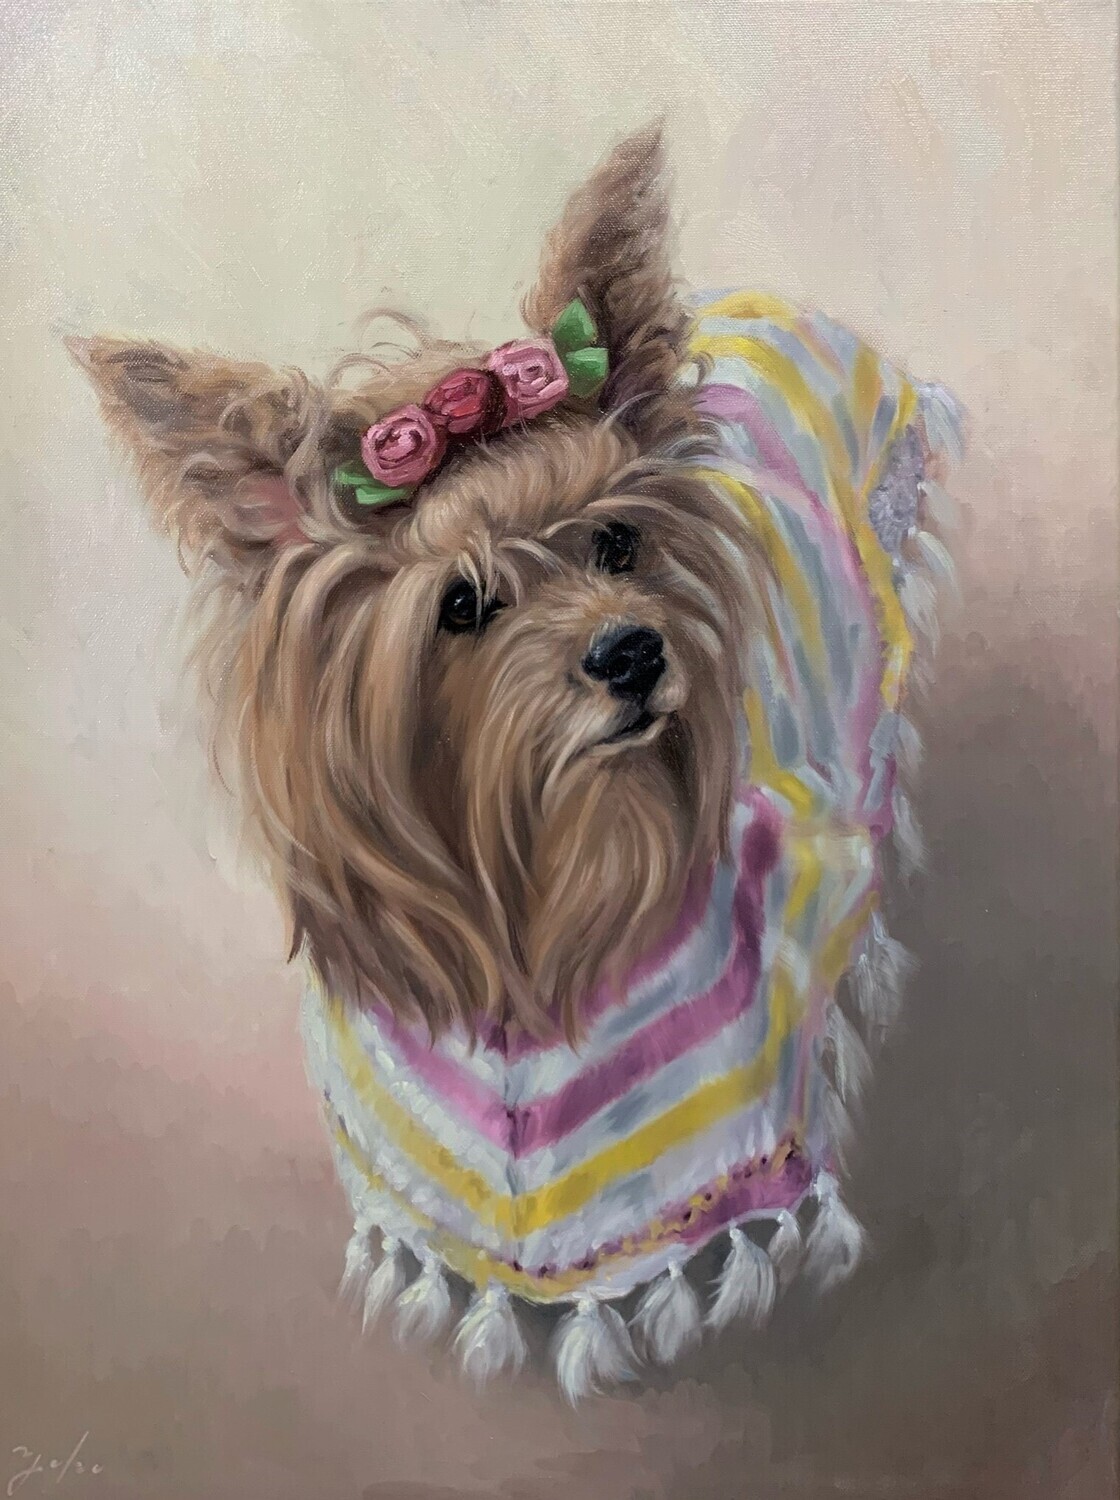 18x24inch - Pet Custom Oil Portrait Painting from